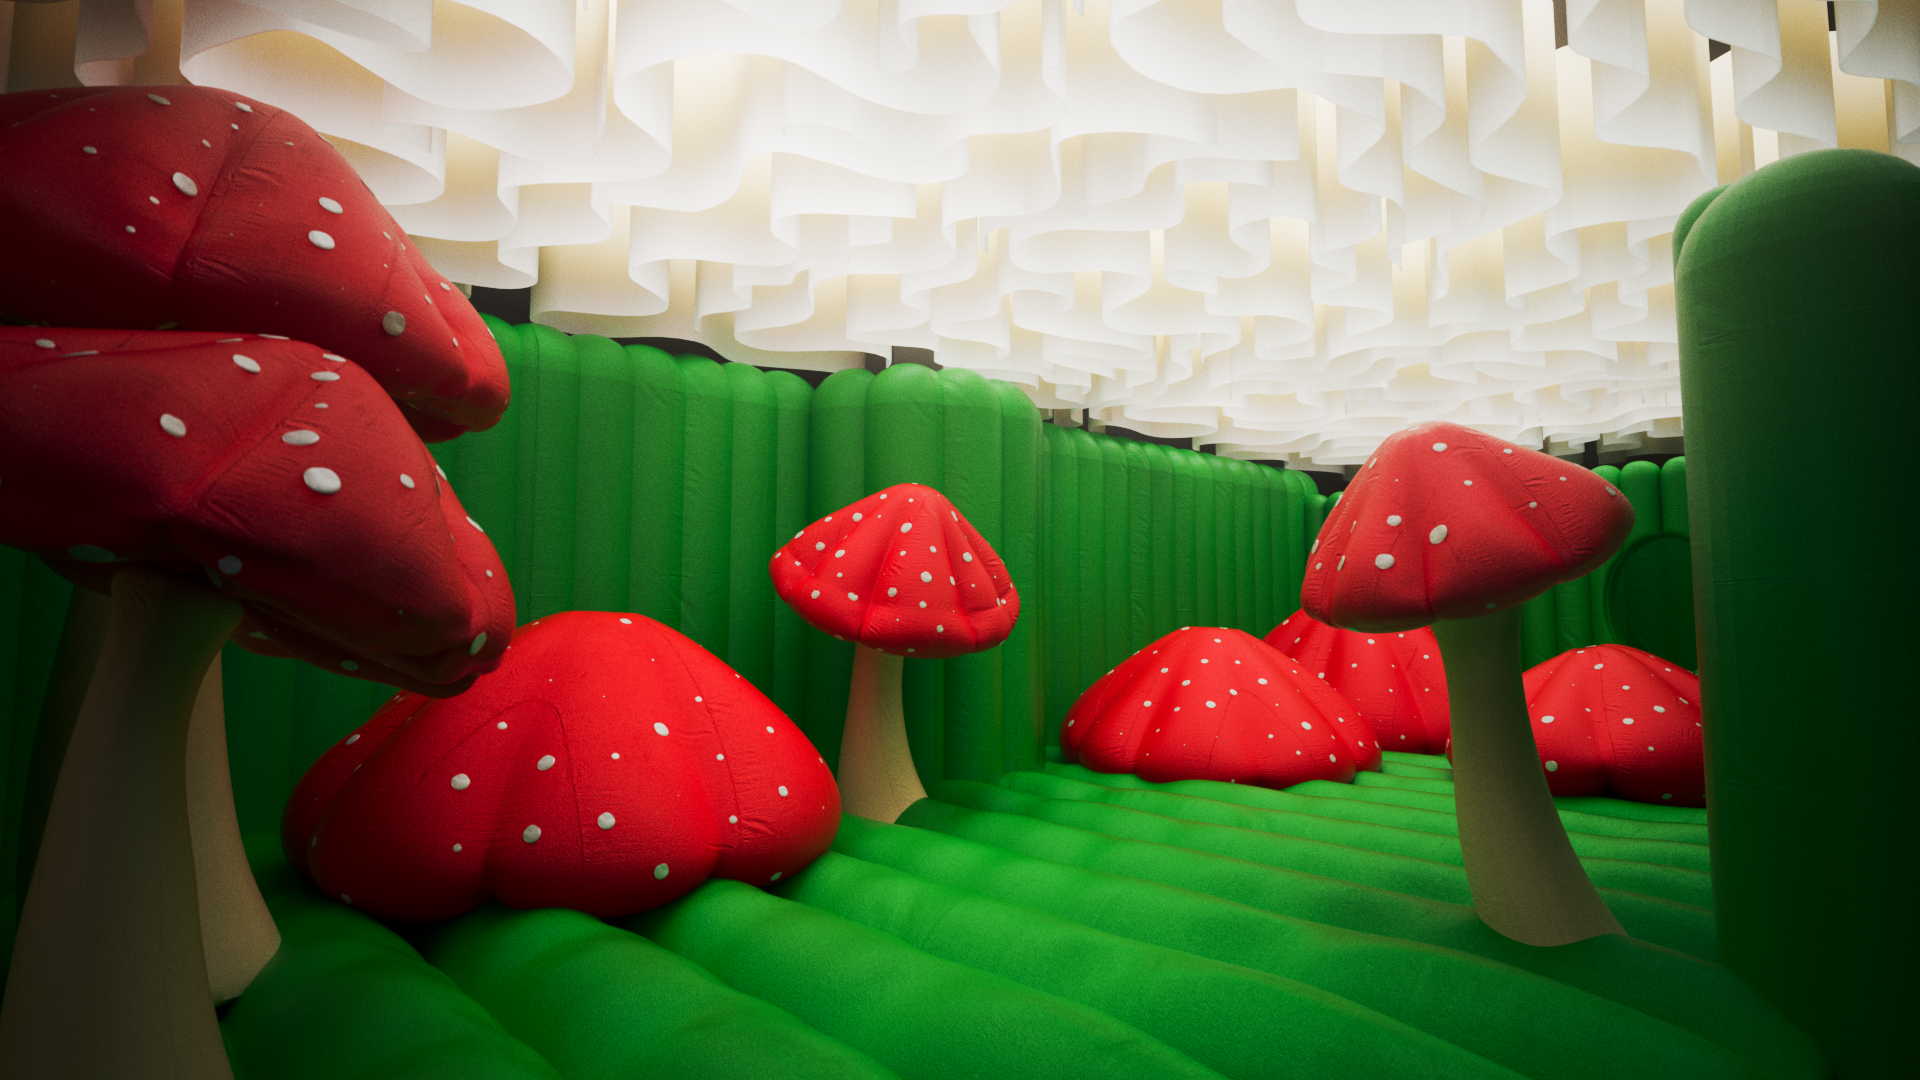 Mushrooms in an immersive experience.